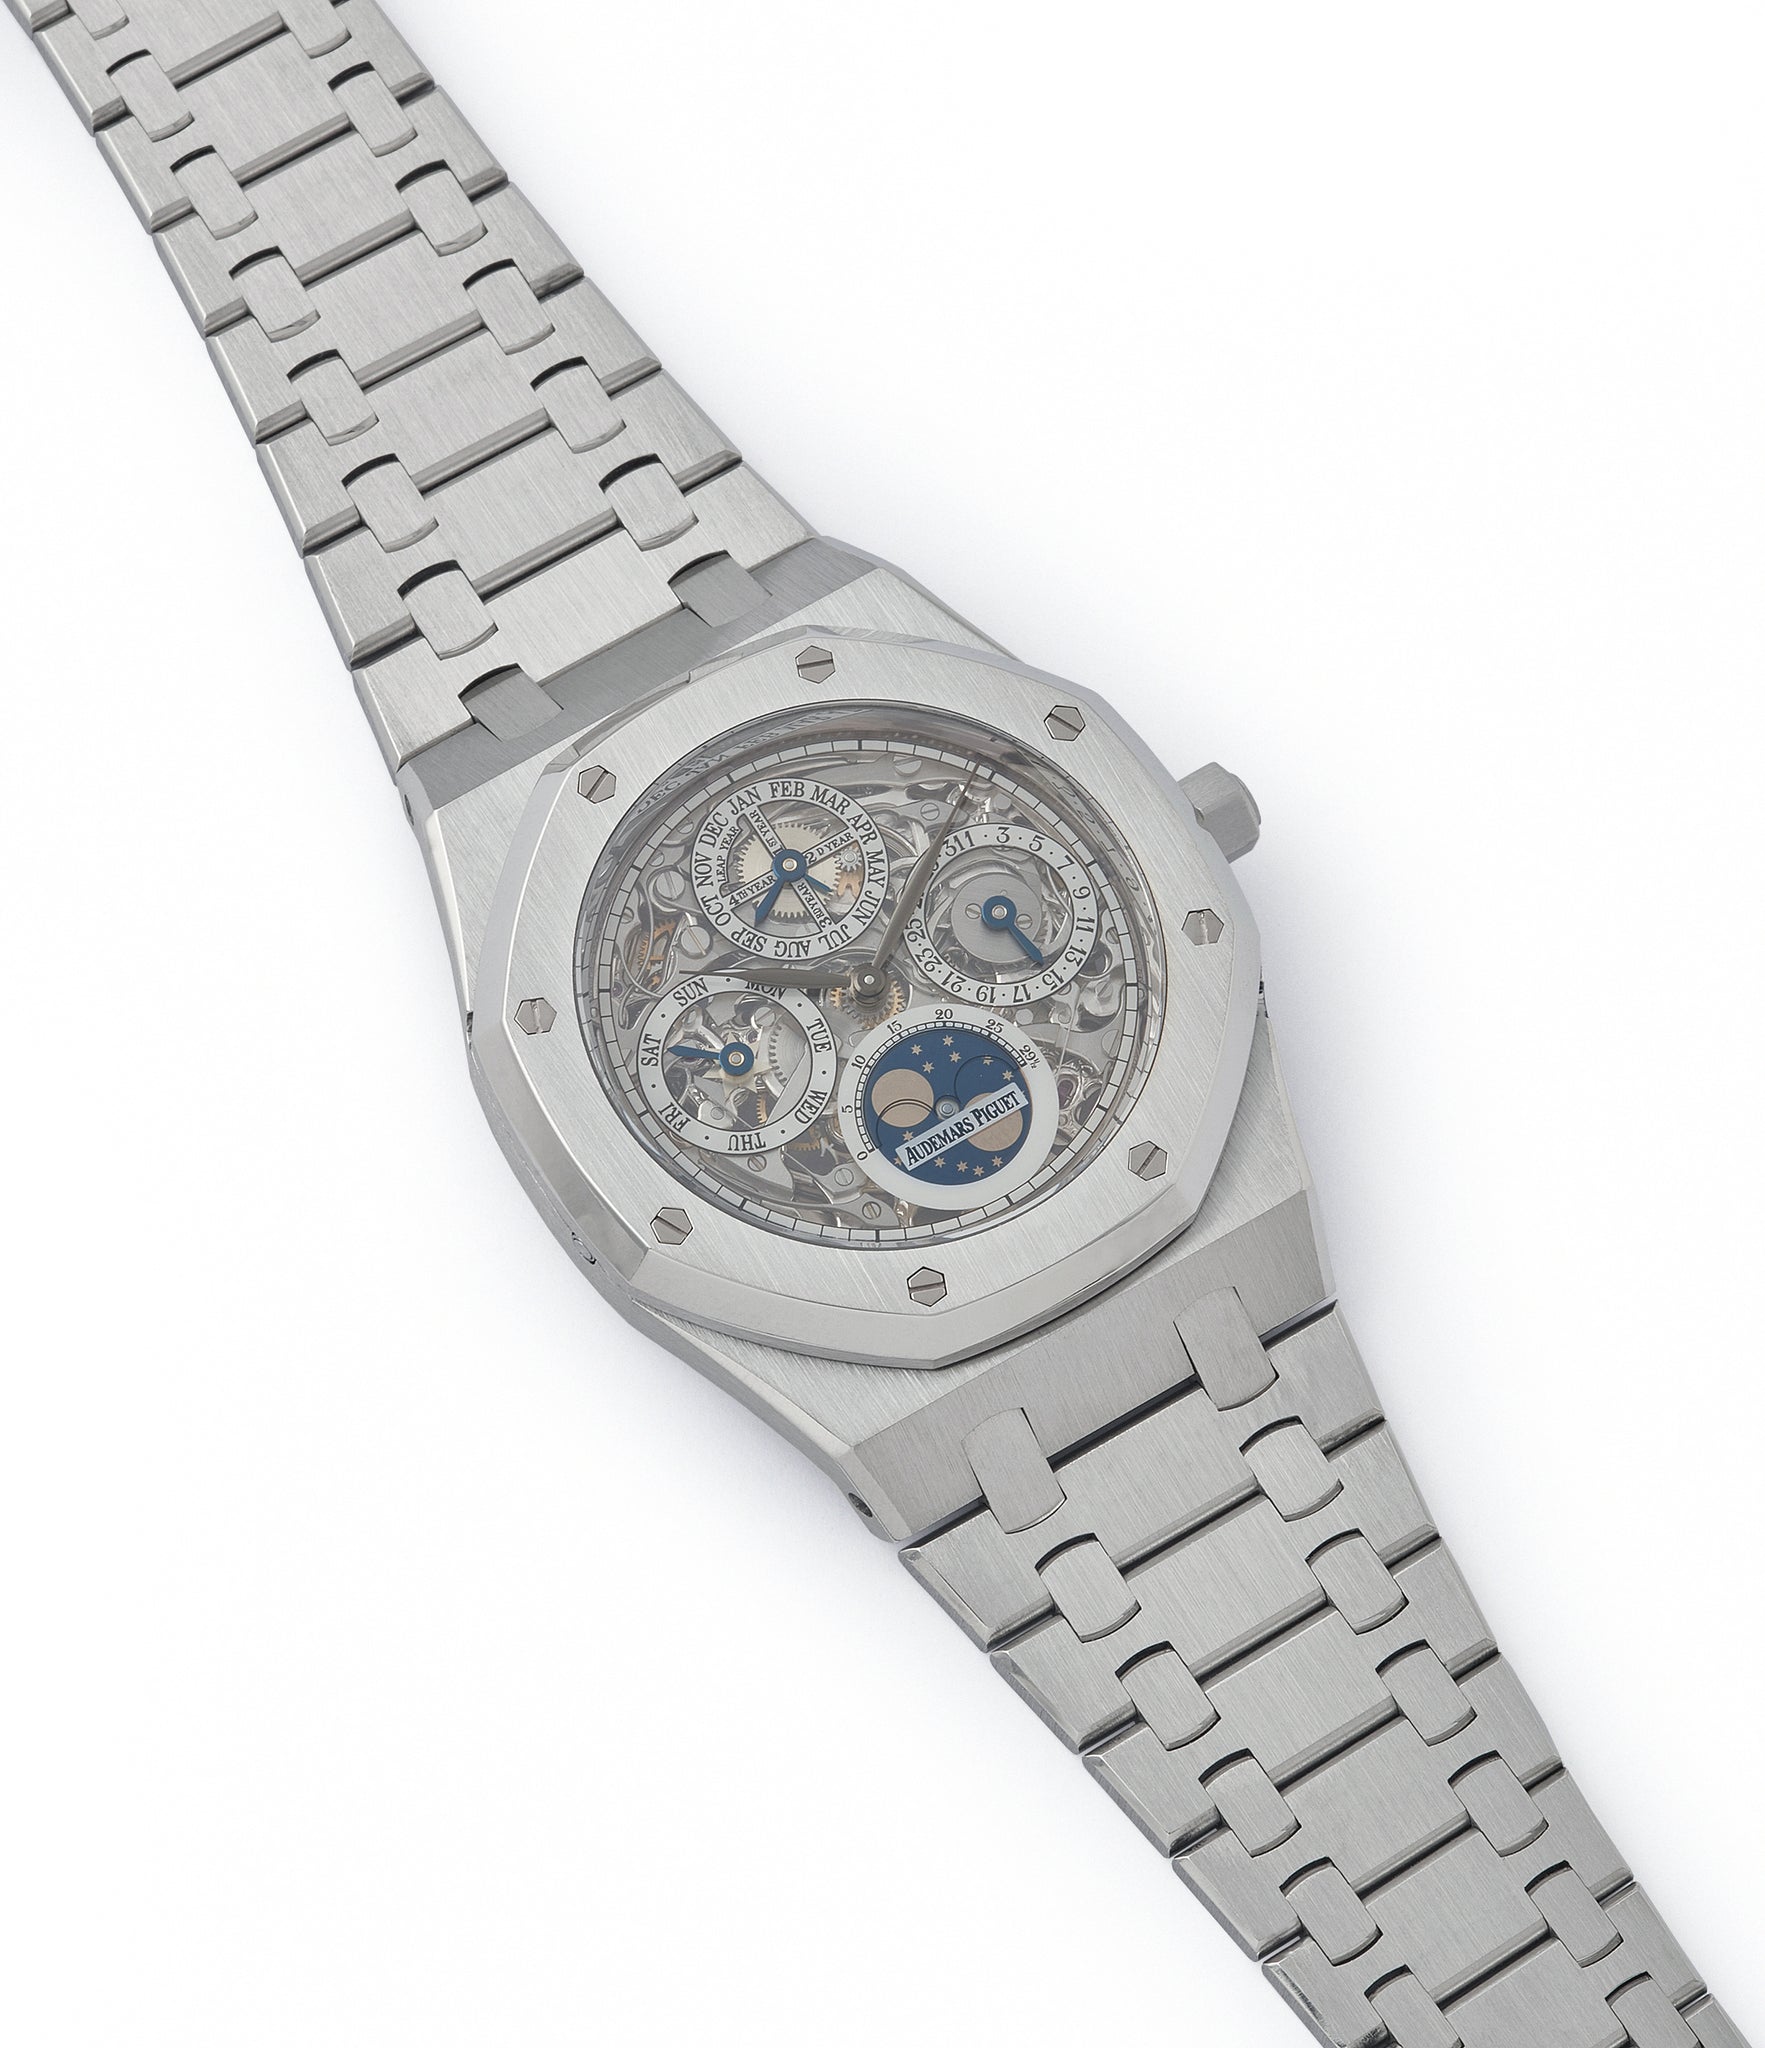 selling Audemars Piguet Royal Oak 25829PT perpetual calendar skeleton dial platinum full set pre-owned watch for sale online at A Collected Man London UK specialist of rare watches